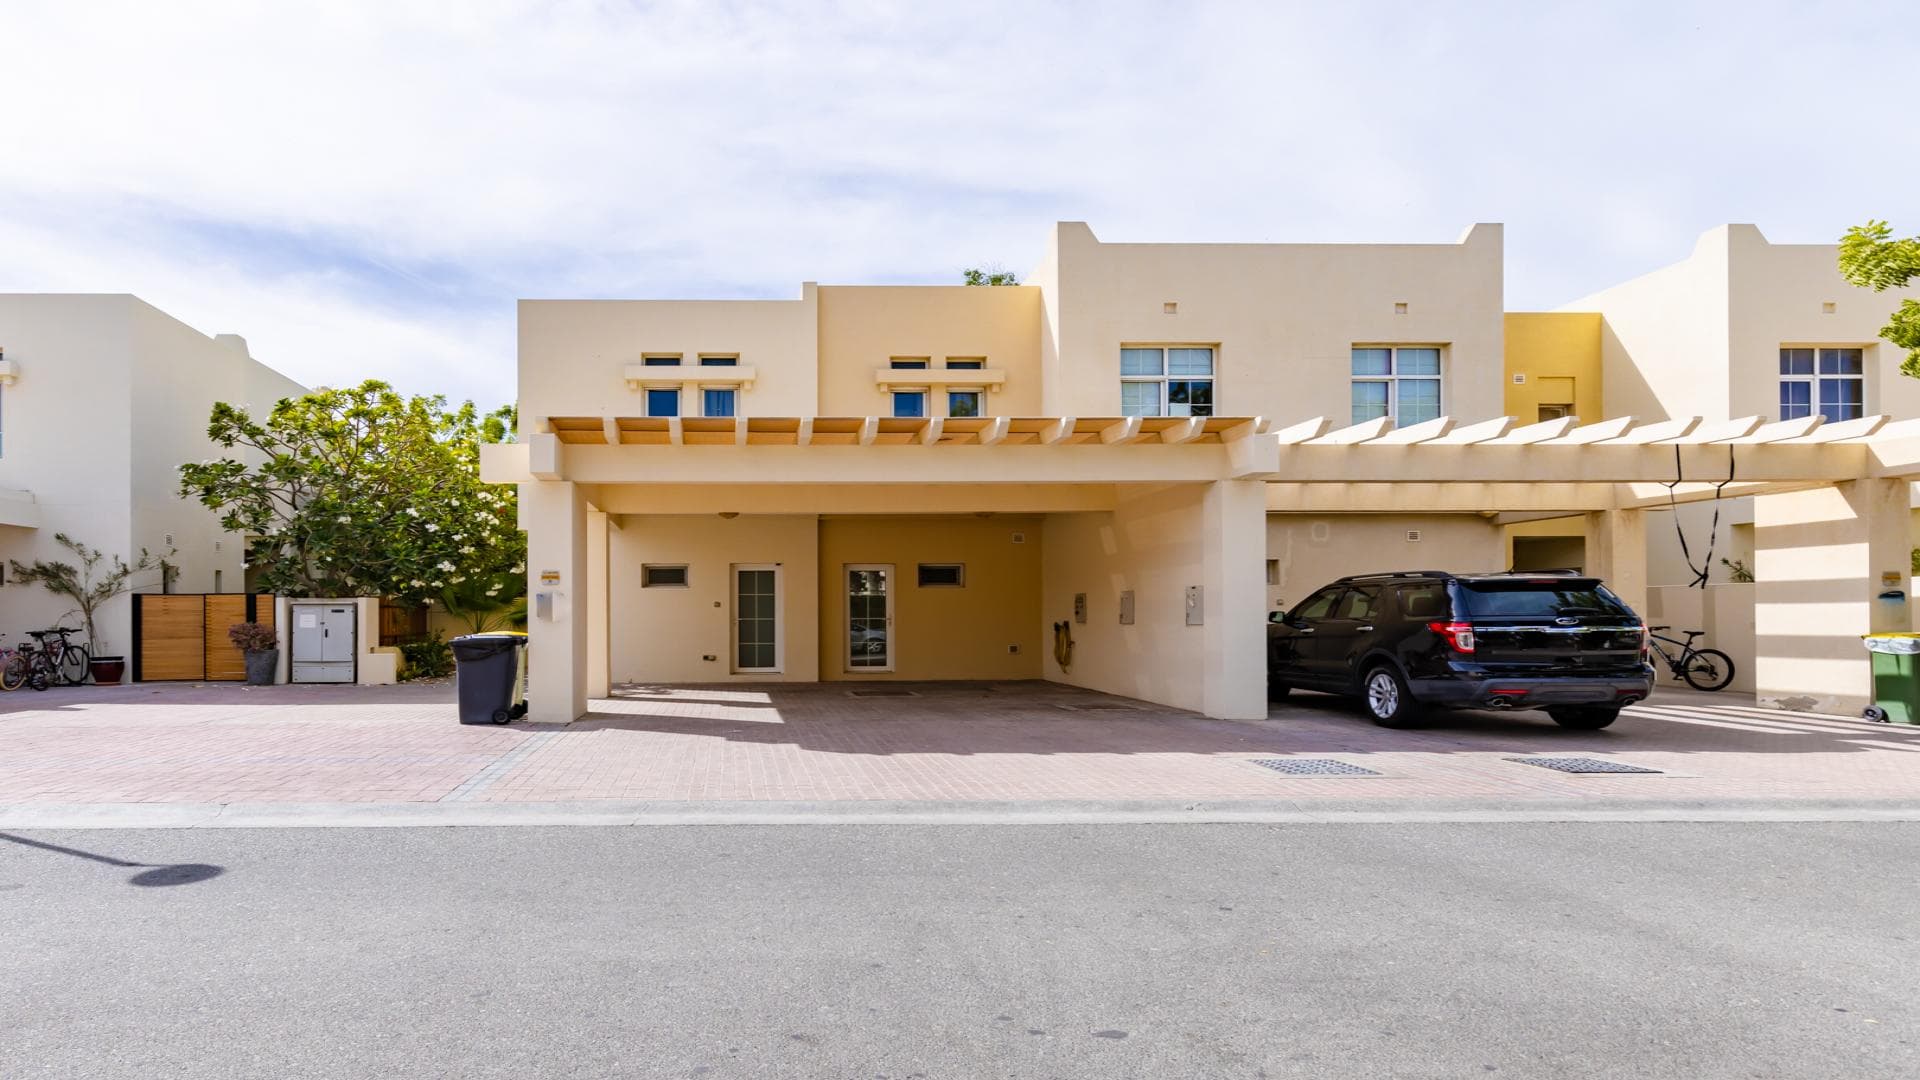 3 Bedroom Townhouse For Sale Icon Tower 1 Lp38558 10b9e57f583f6100.jpg